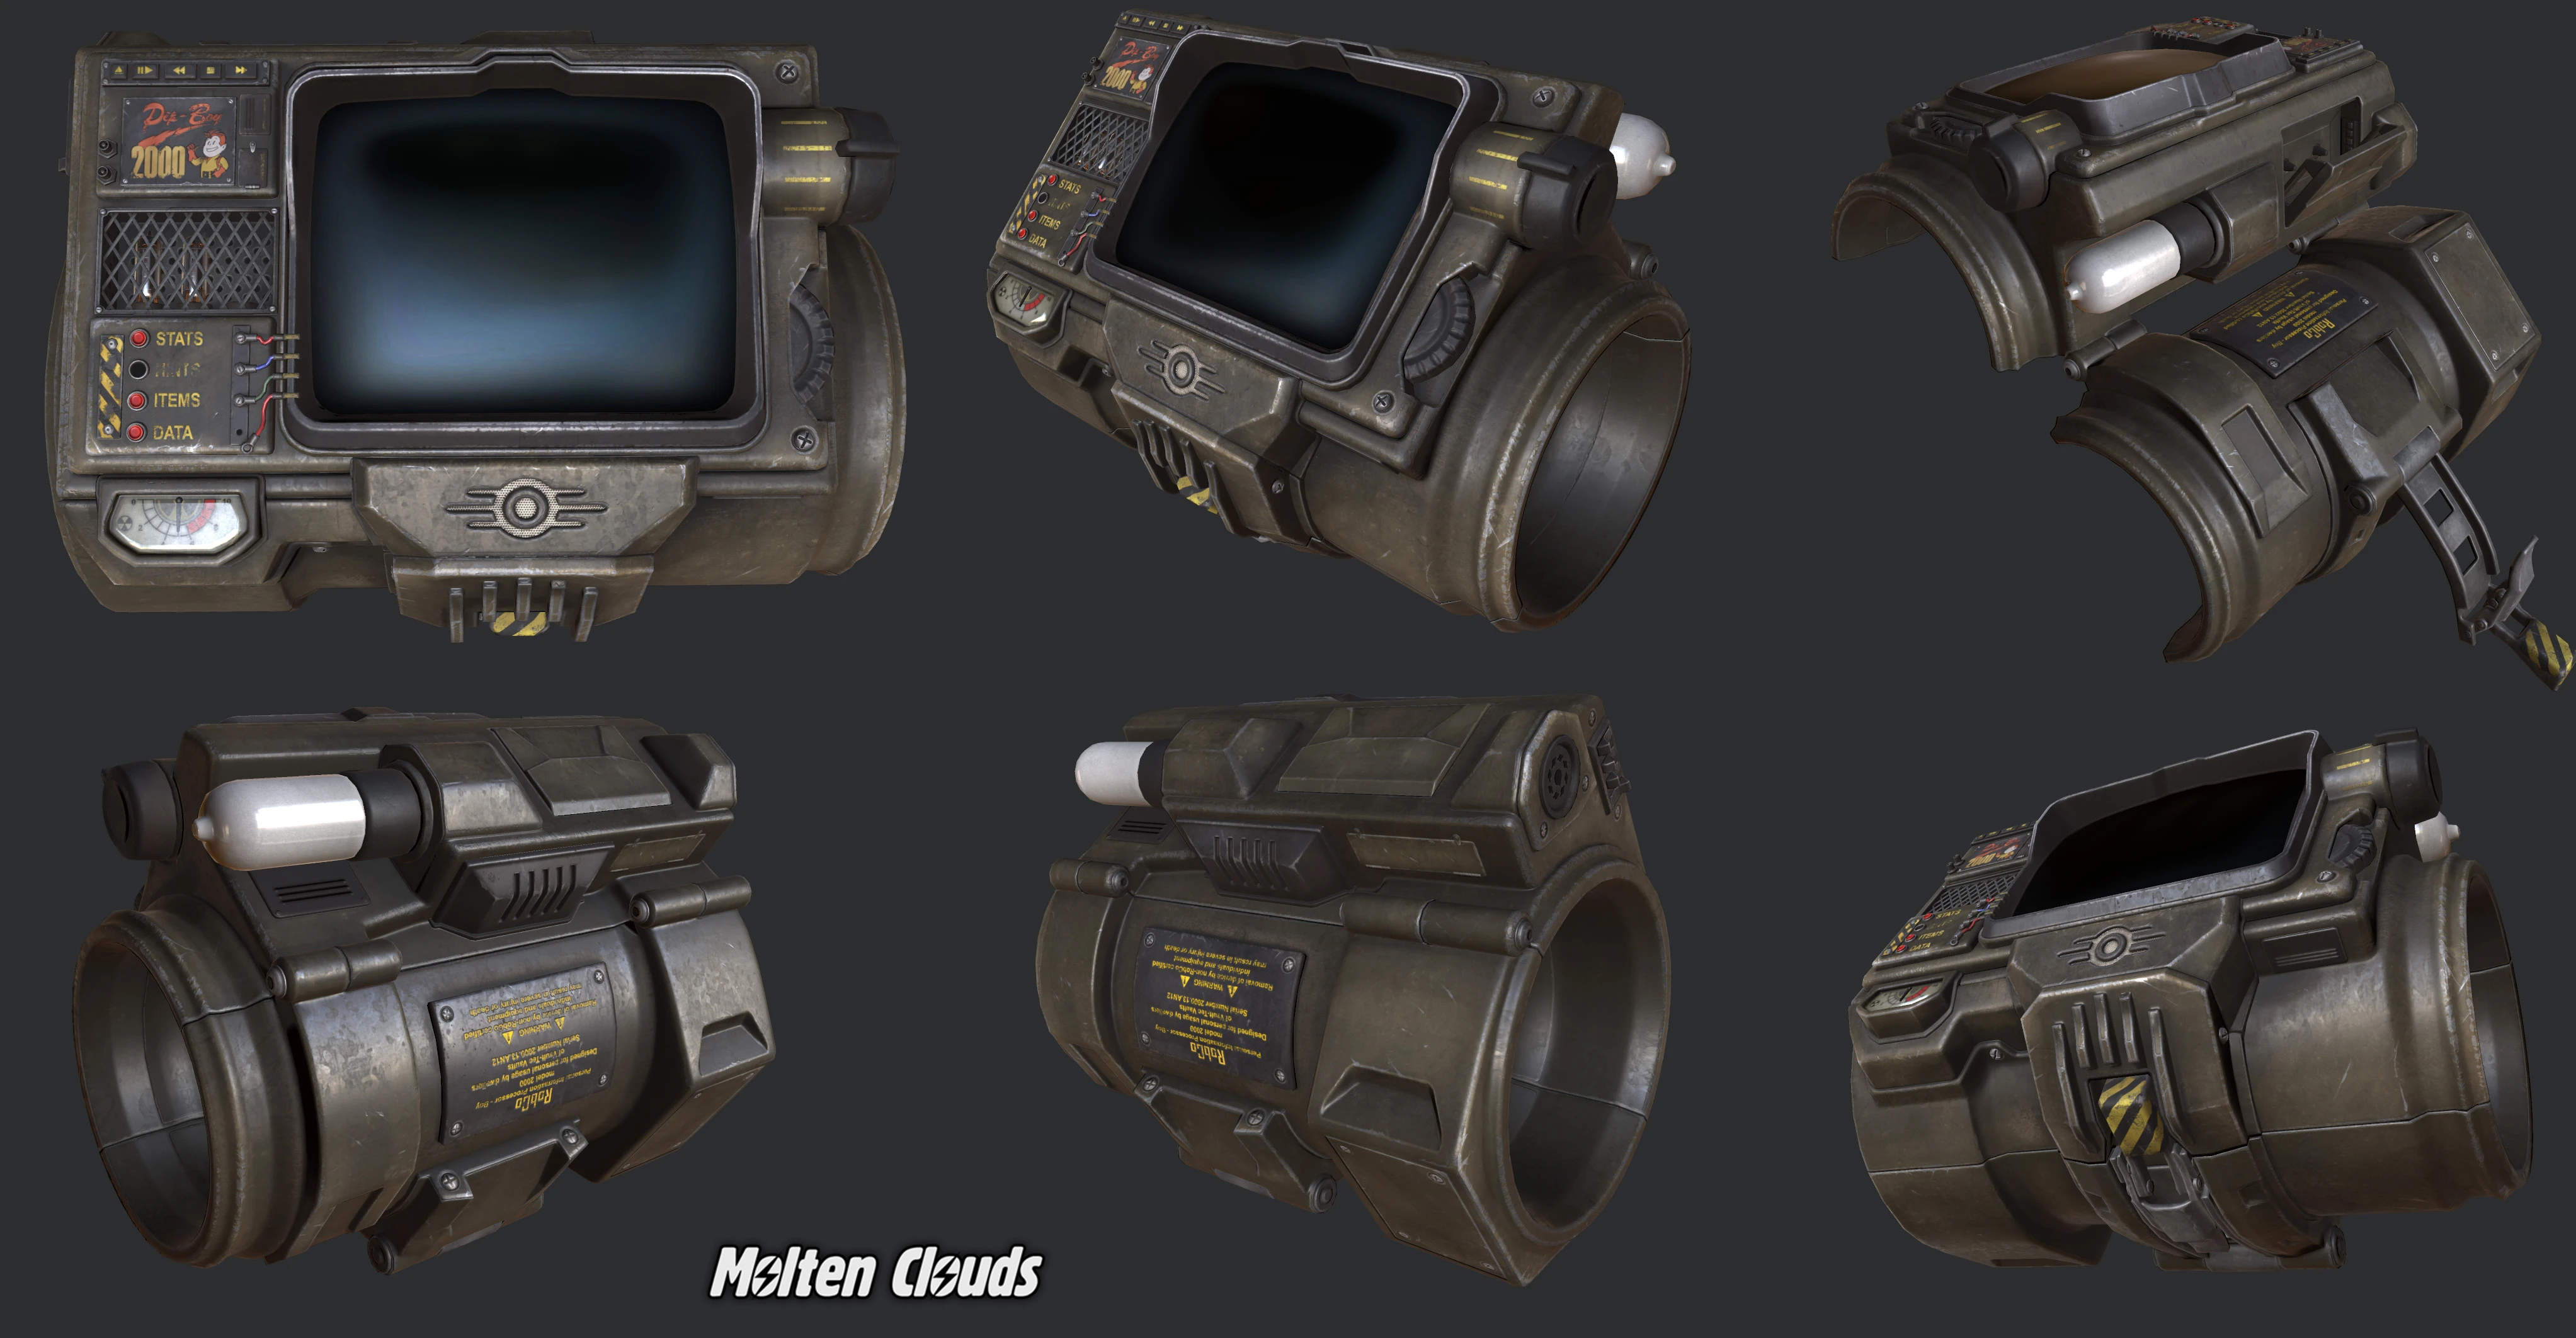 PipBoy 2000 at Fallout New Vegas - mods and community